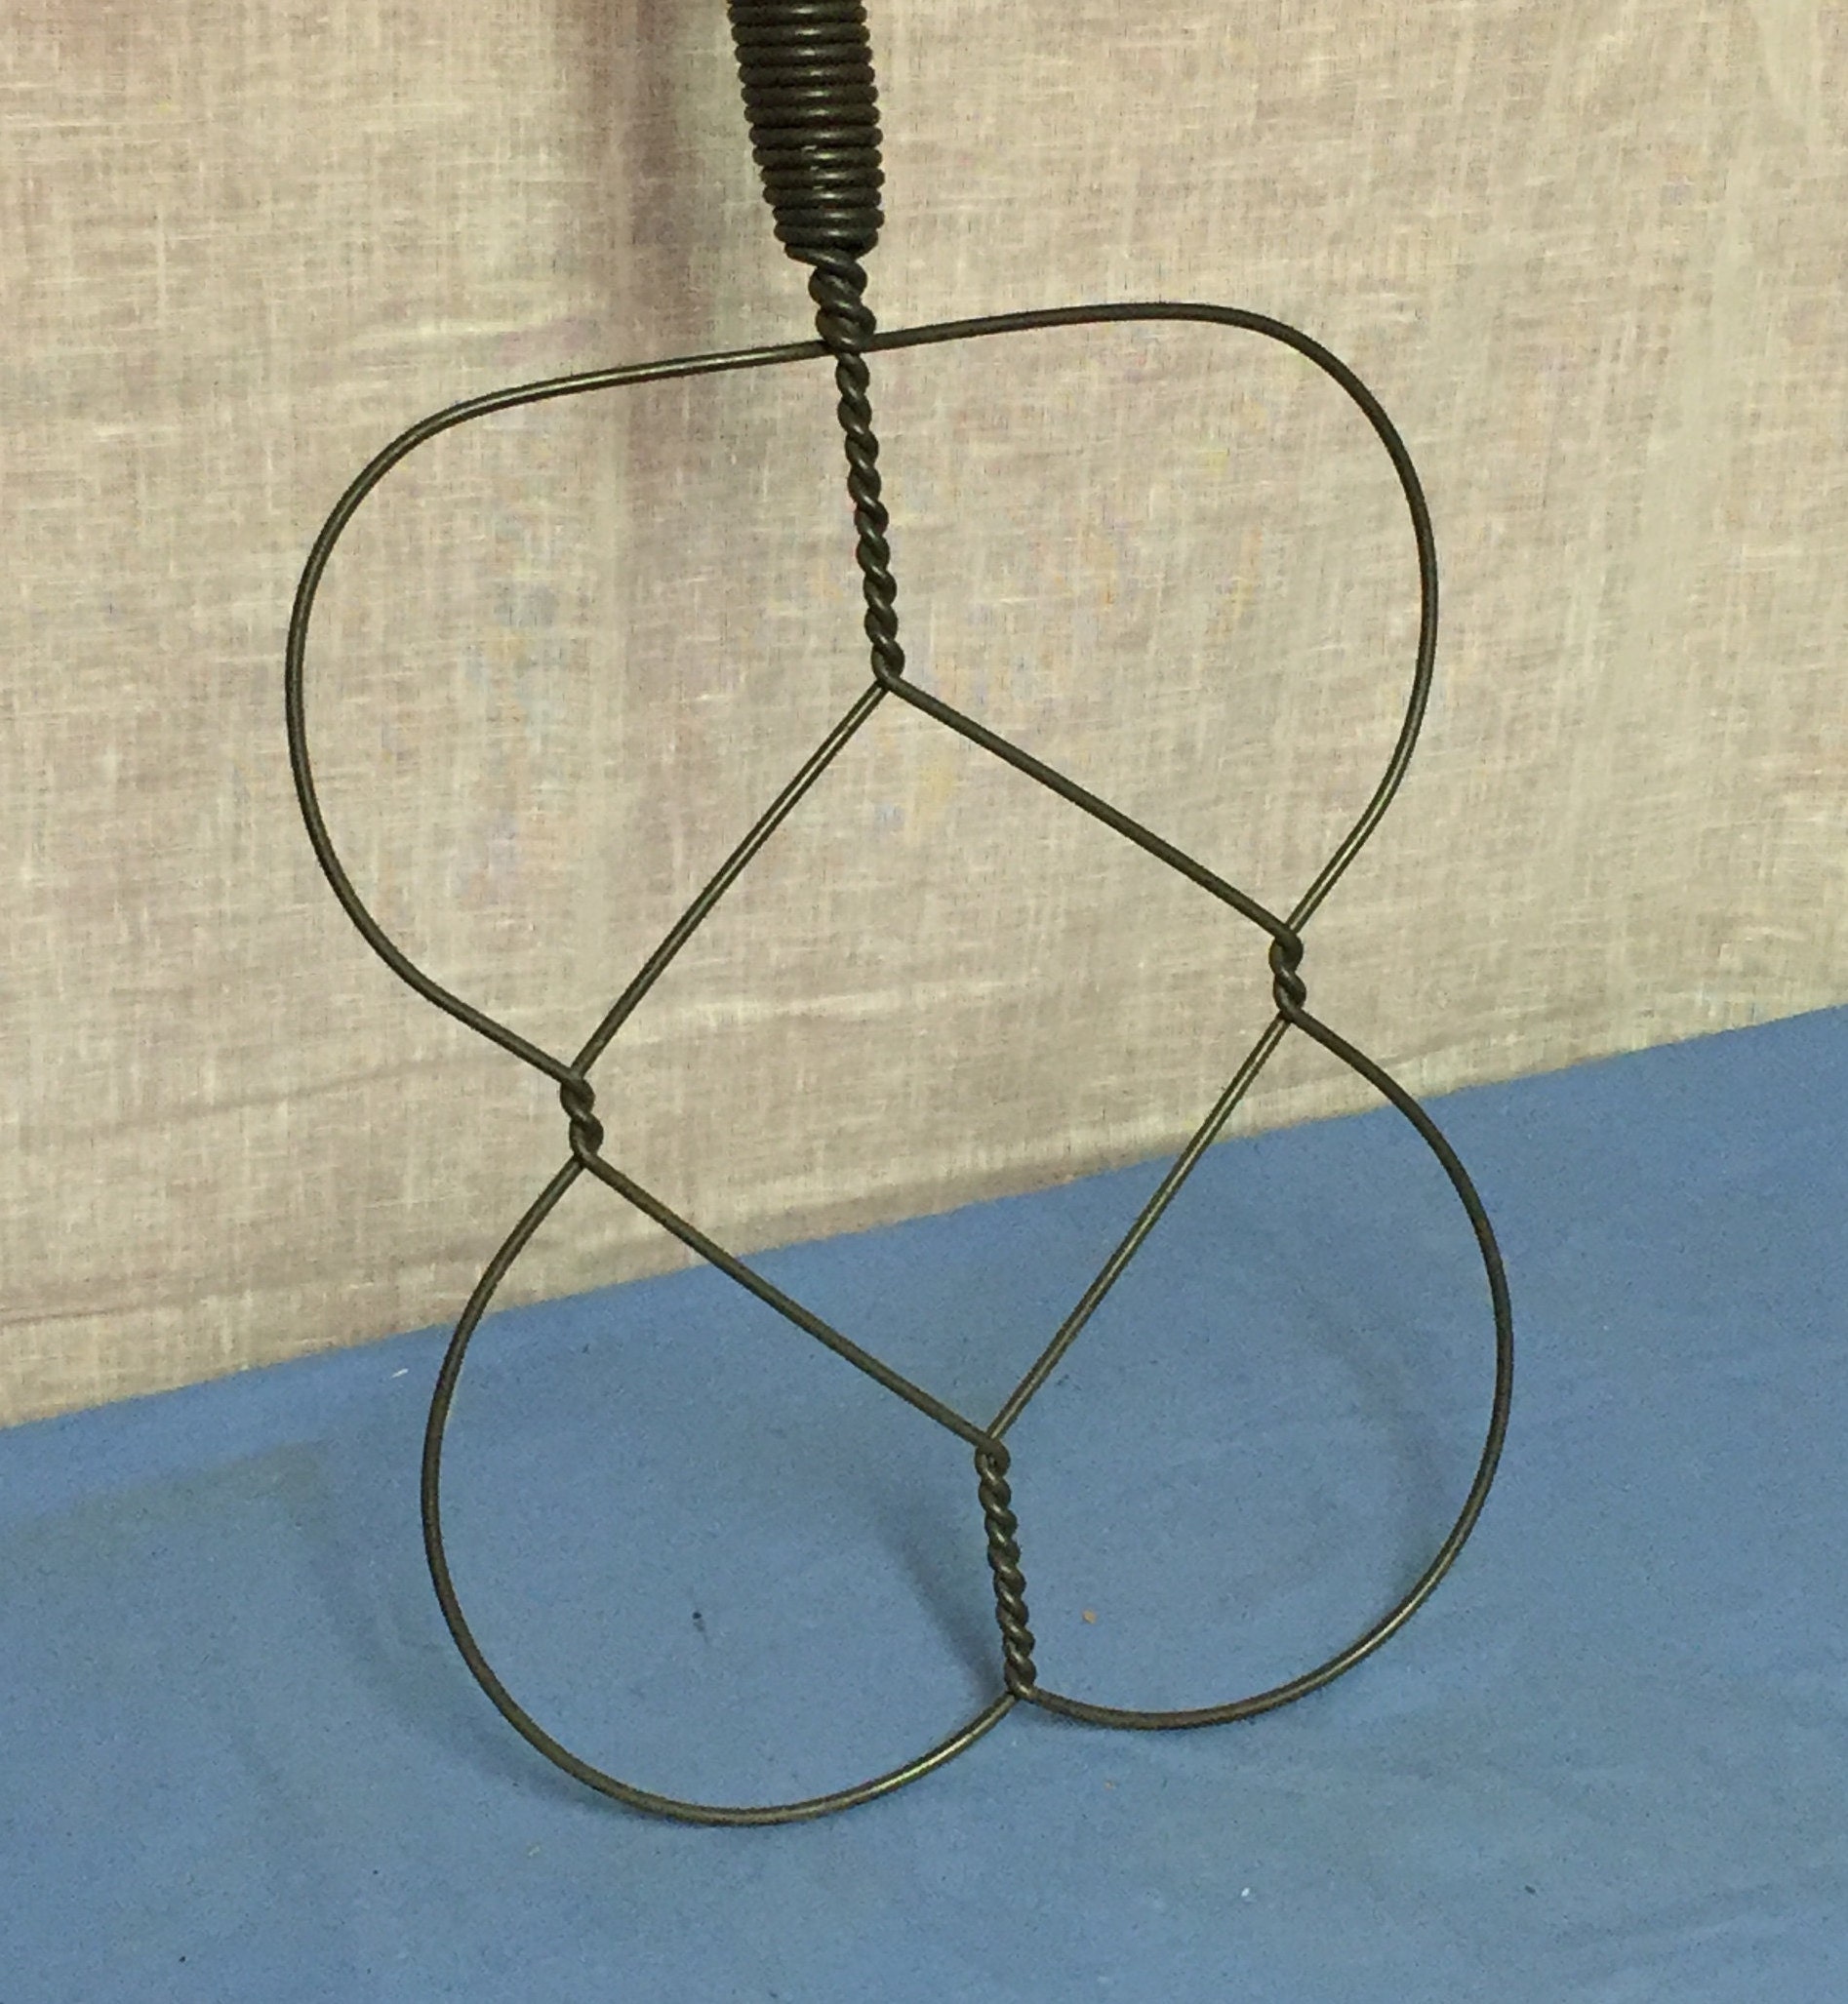 Vintage Twisted Wire With Wooden Handle Rug Beater